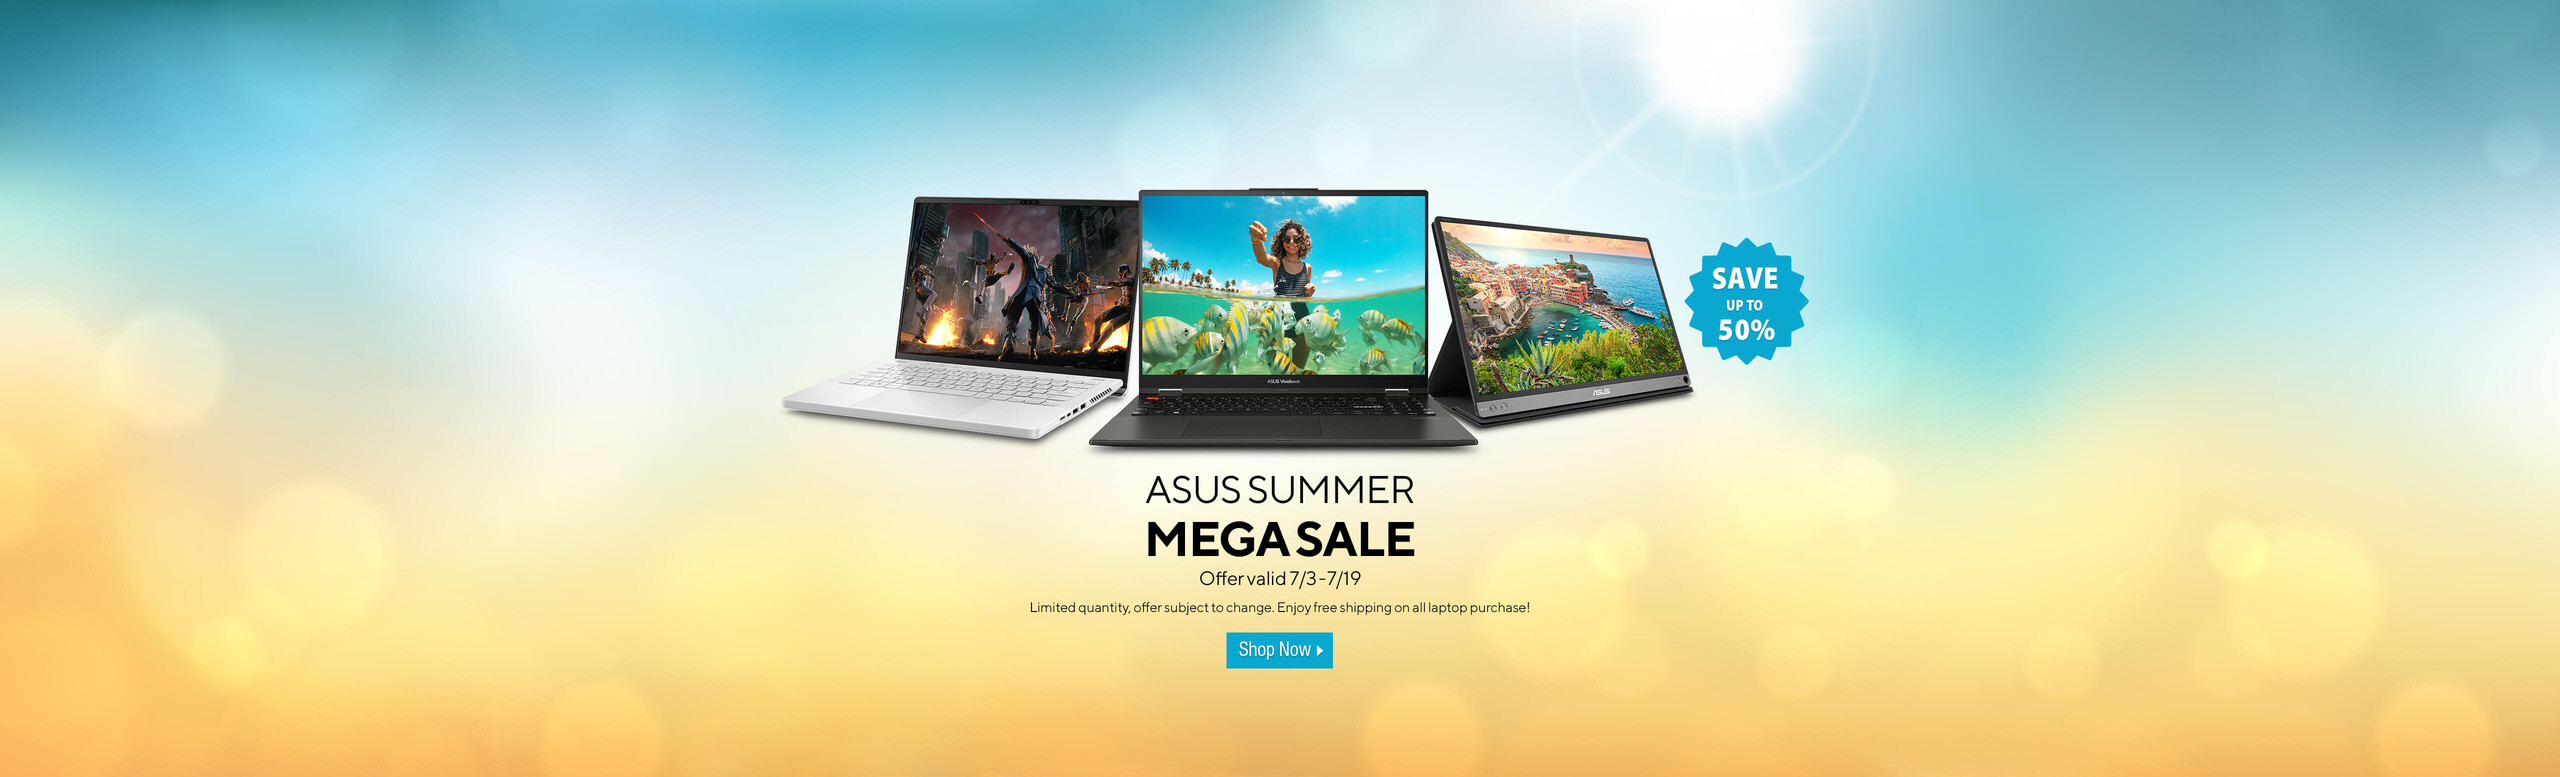 Image of a 2 laptops and mointor ASUS SUMMER MEGA SALE Offer valid 7/3-7/19 Limited quantity, offer subject to change.  Enjoy free shipping on all laptop purchase!  Shop Now